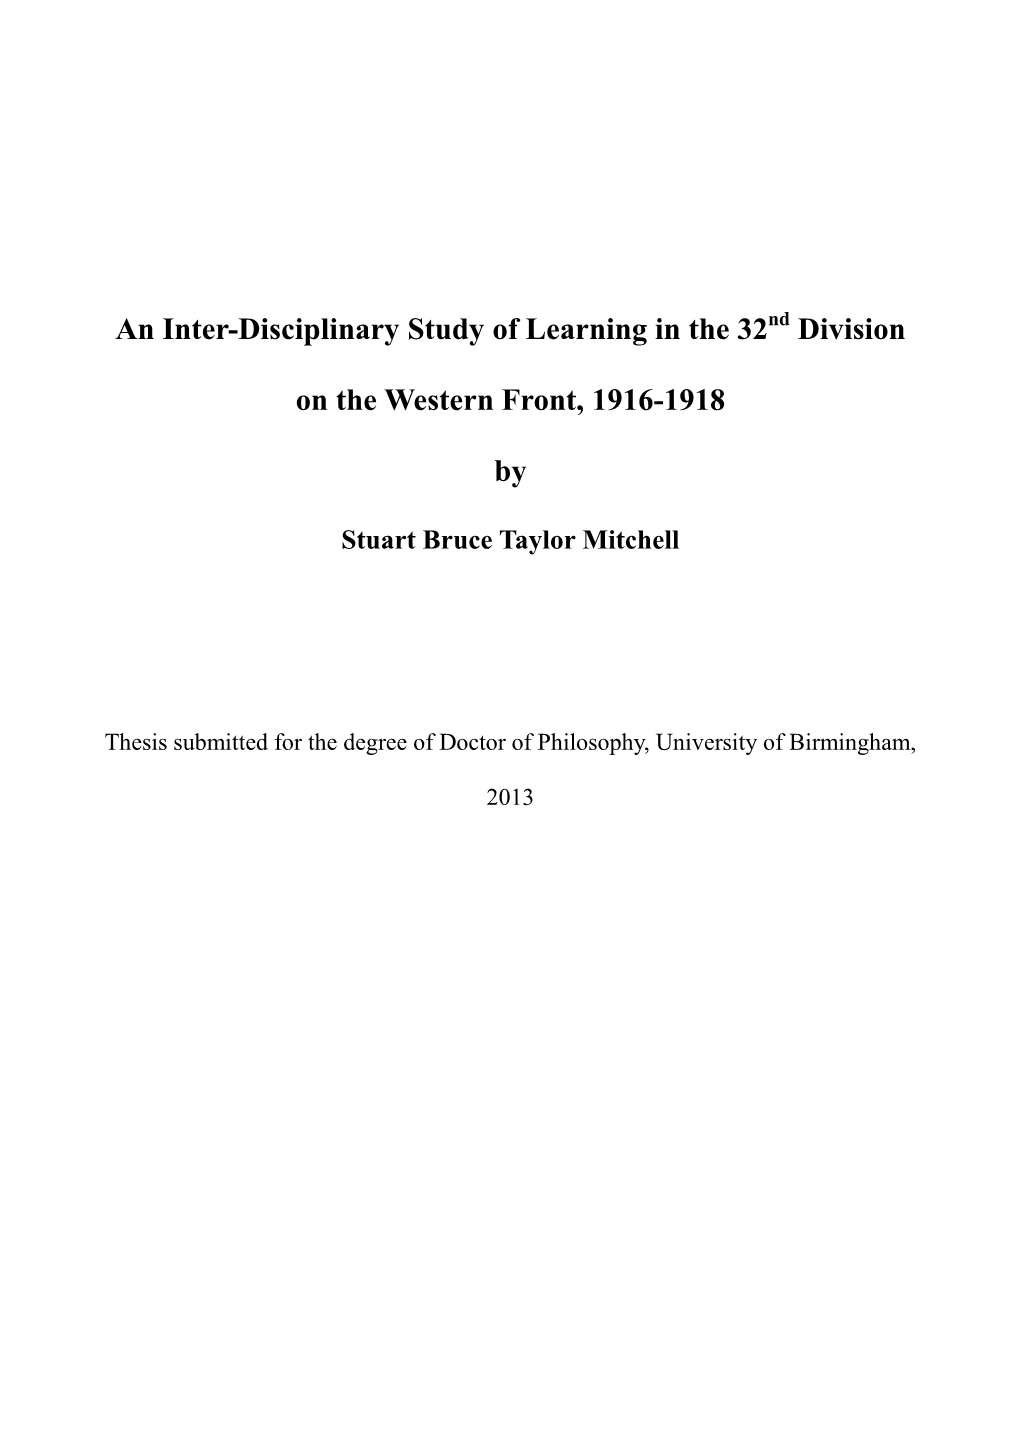 Division on the Western Front, 1916-1918 By